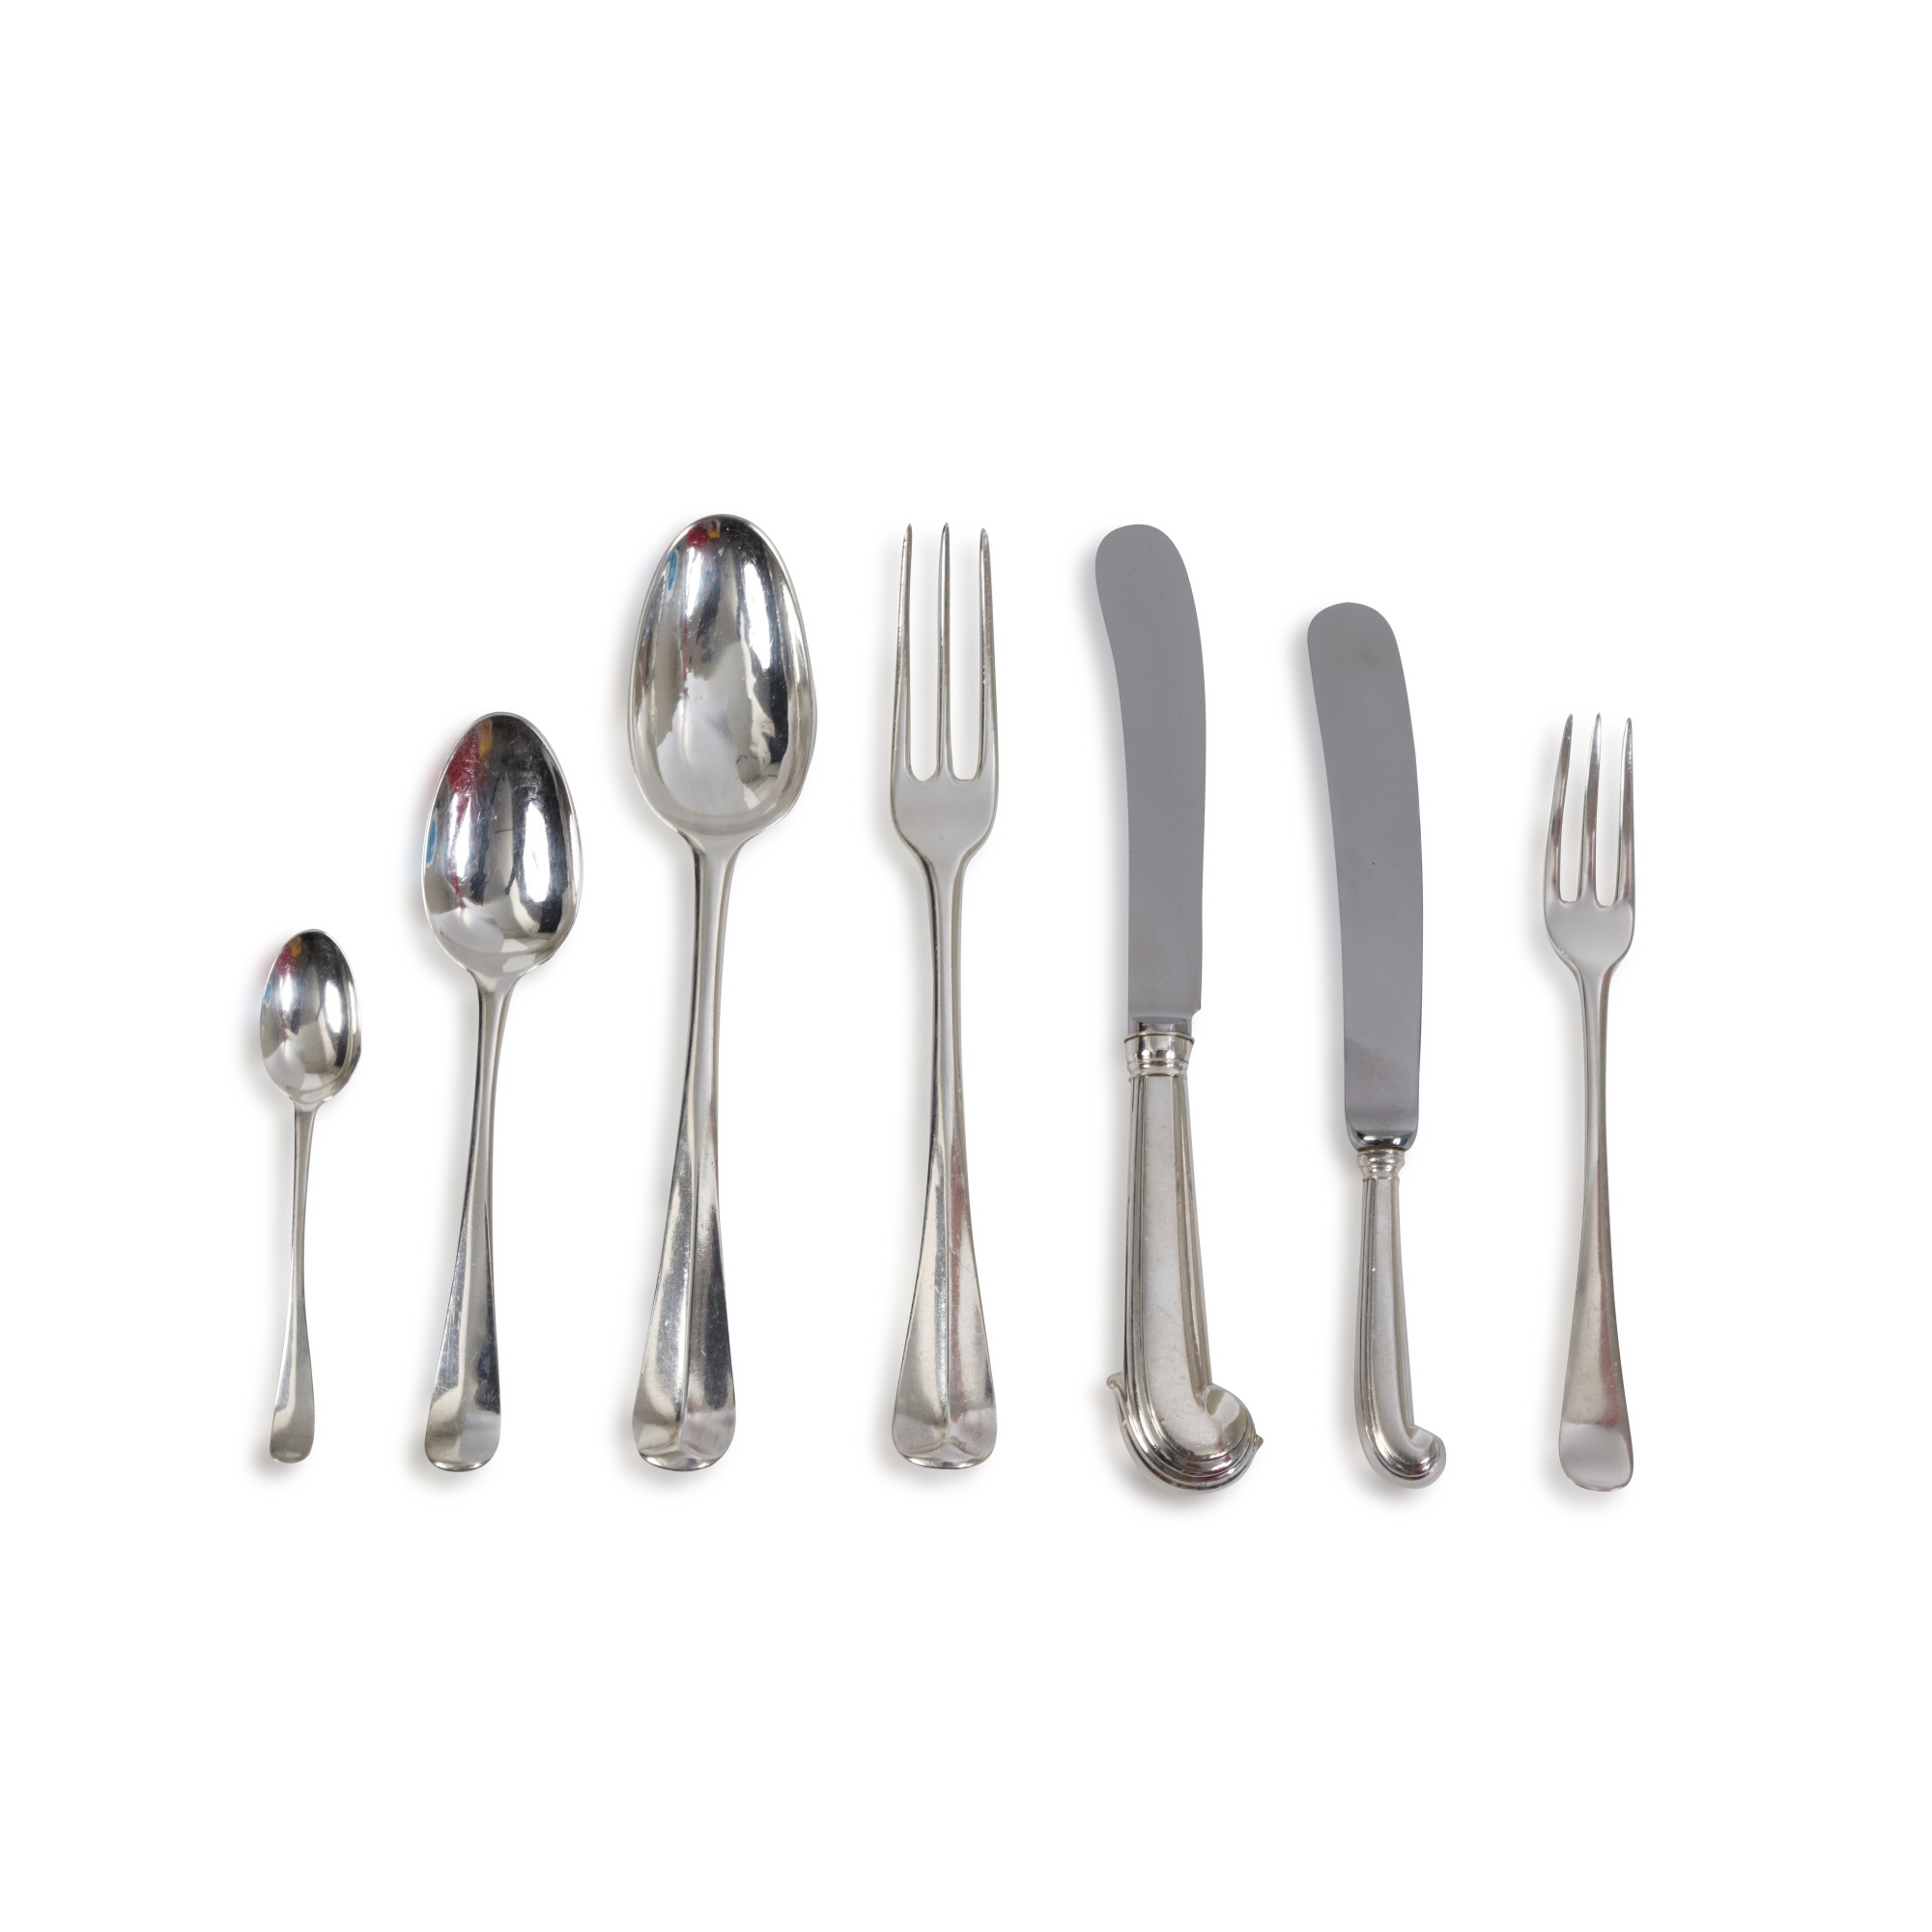 An Assembled Irish Silver Old English Pattern Flatware Service, Dublin, 1735 and Circa - Image 2 of 5